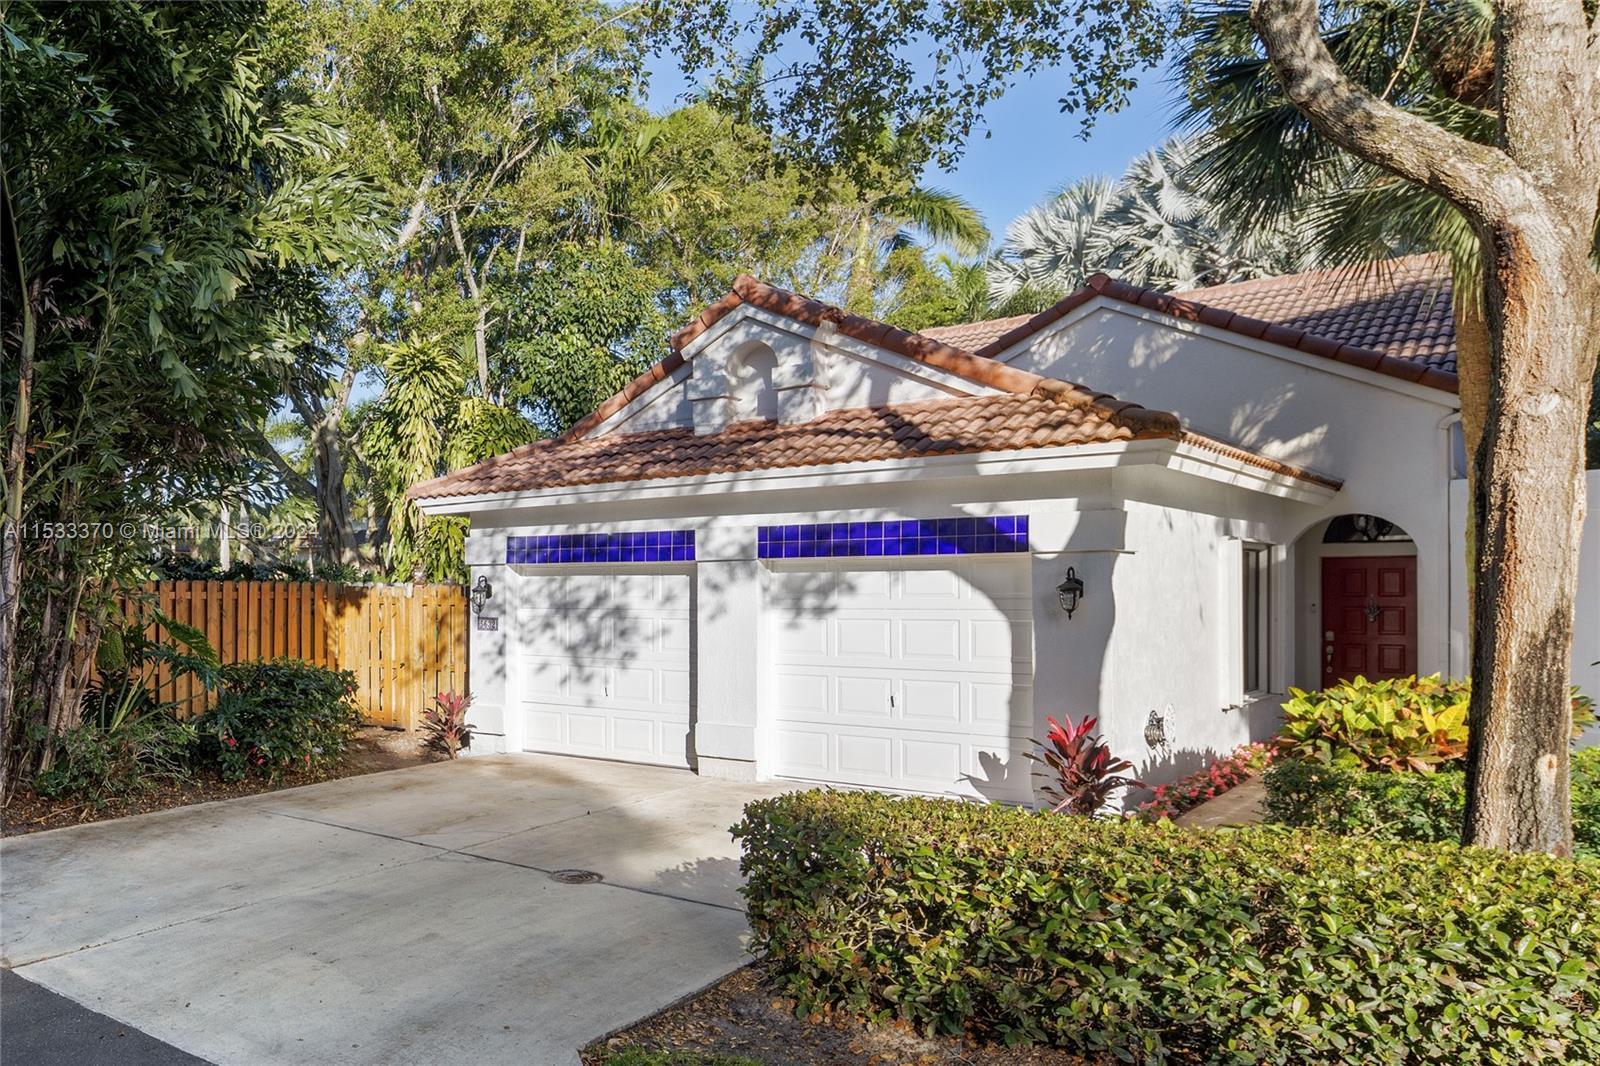 Welcome to this charming 2 bedroom, 2 bath home nestled in Wimbledon Villas of Boca Raton.  This del